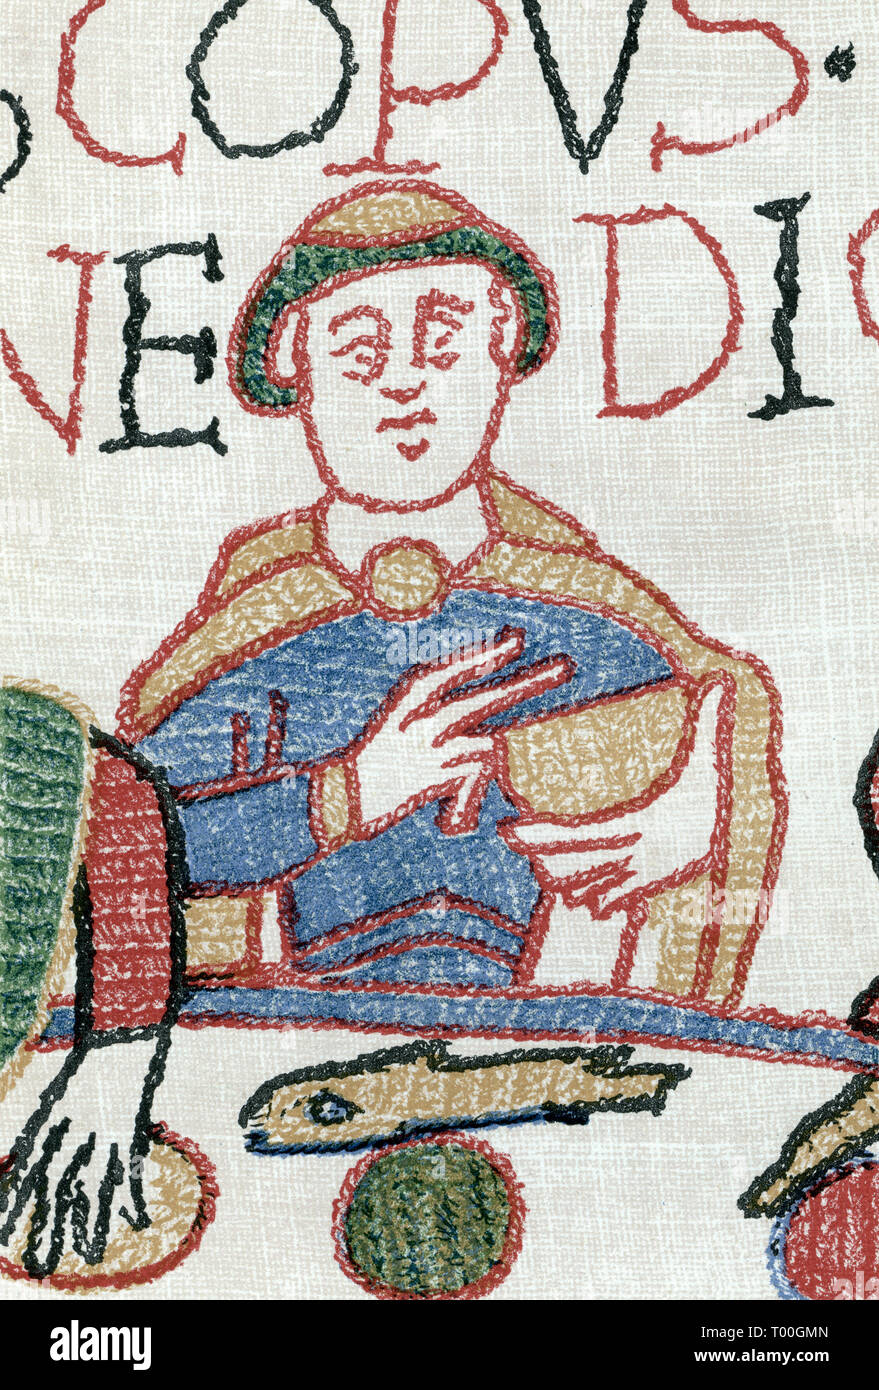 Bayeux Tapestry: Bishop Odo saying grace after Norman landing in England, September, 1066. The Bayeux Tapestry is an embroidered cloth measuring approx 70 metres (230 ft) long and 50 centimetres (20 in) tall. It depicts the events leading up to the Norman conquest of England concerning William, Duke of Normandy, and Harold, Earl of Wessex, later King of England, and culminating in the Battle of Hastings. Stock Photo